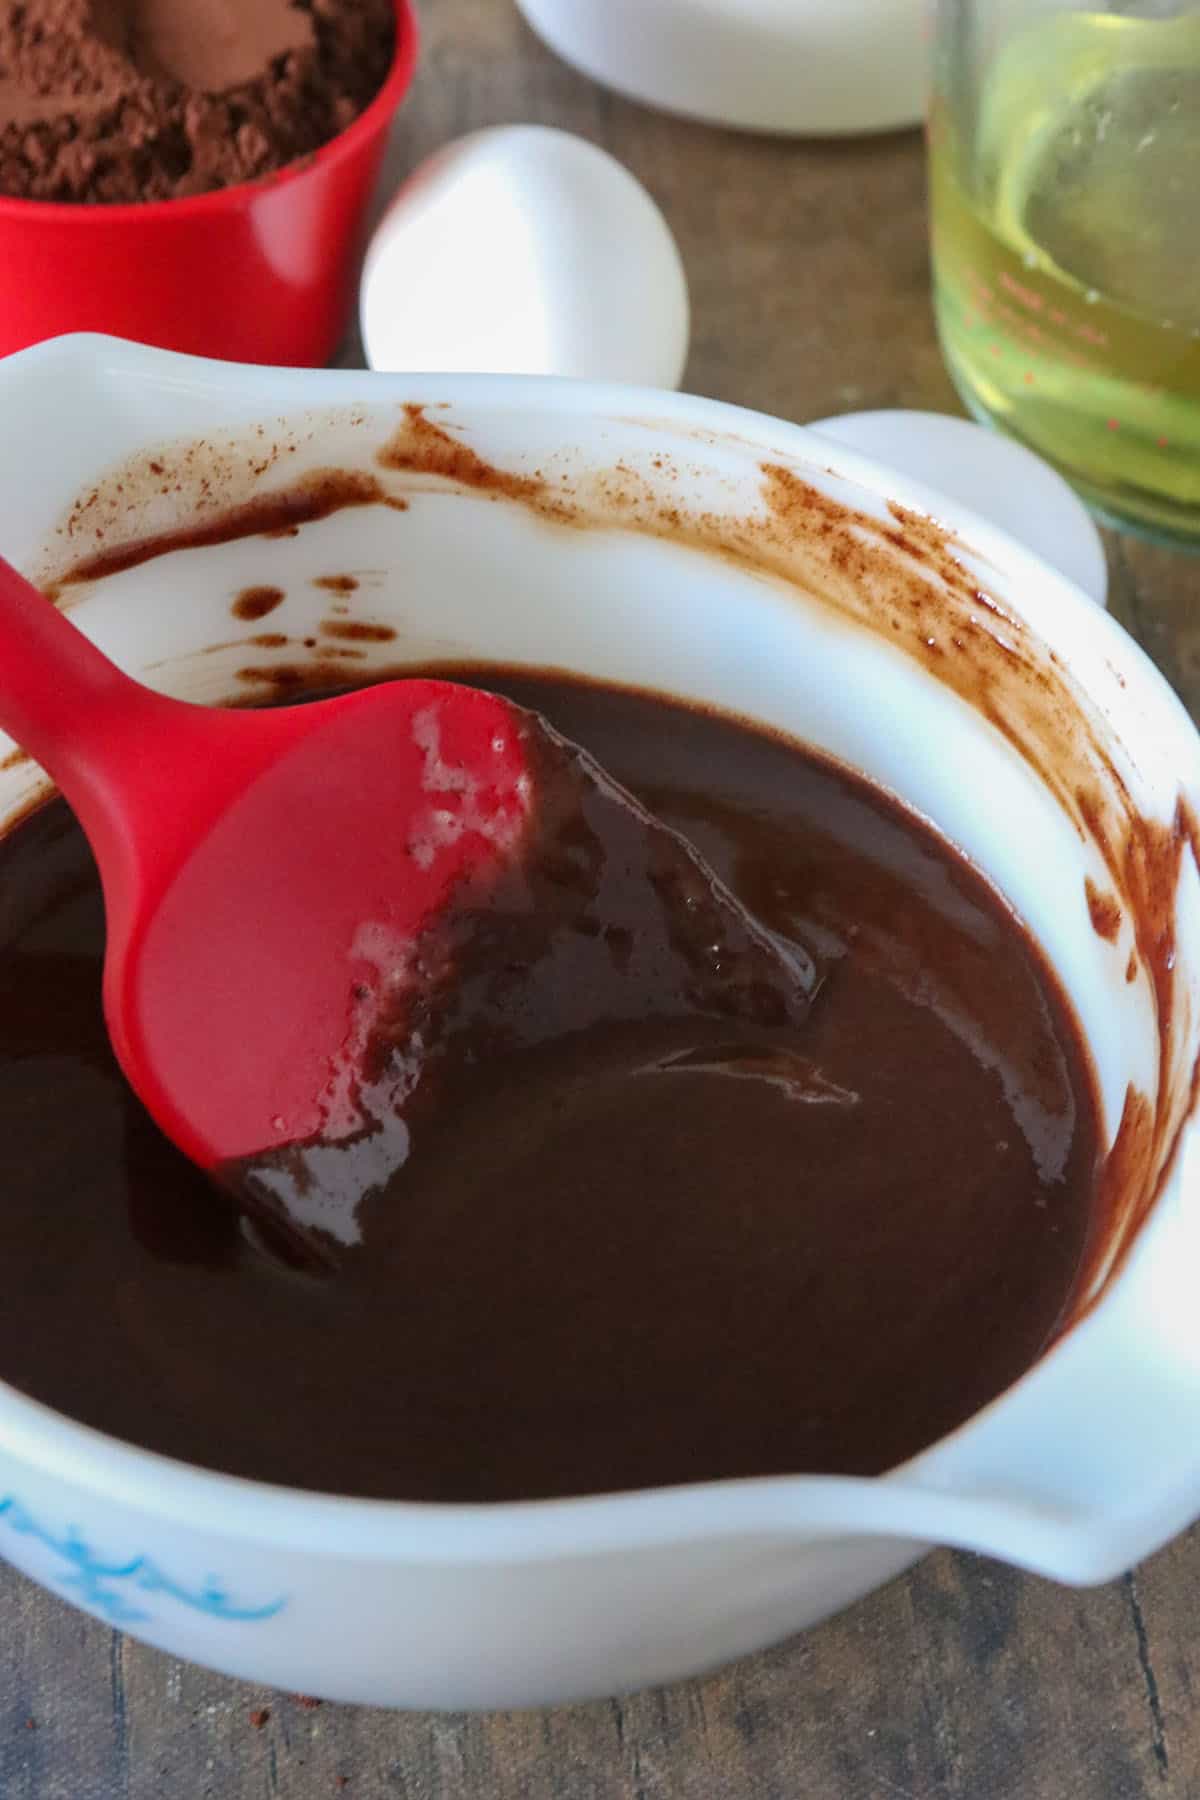 The chocolate ganache in a bowl.